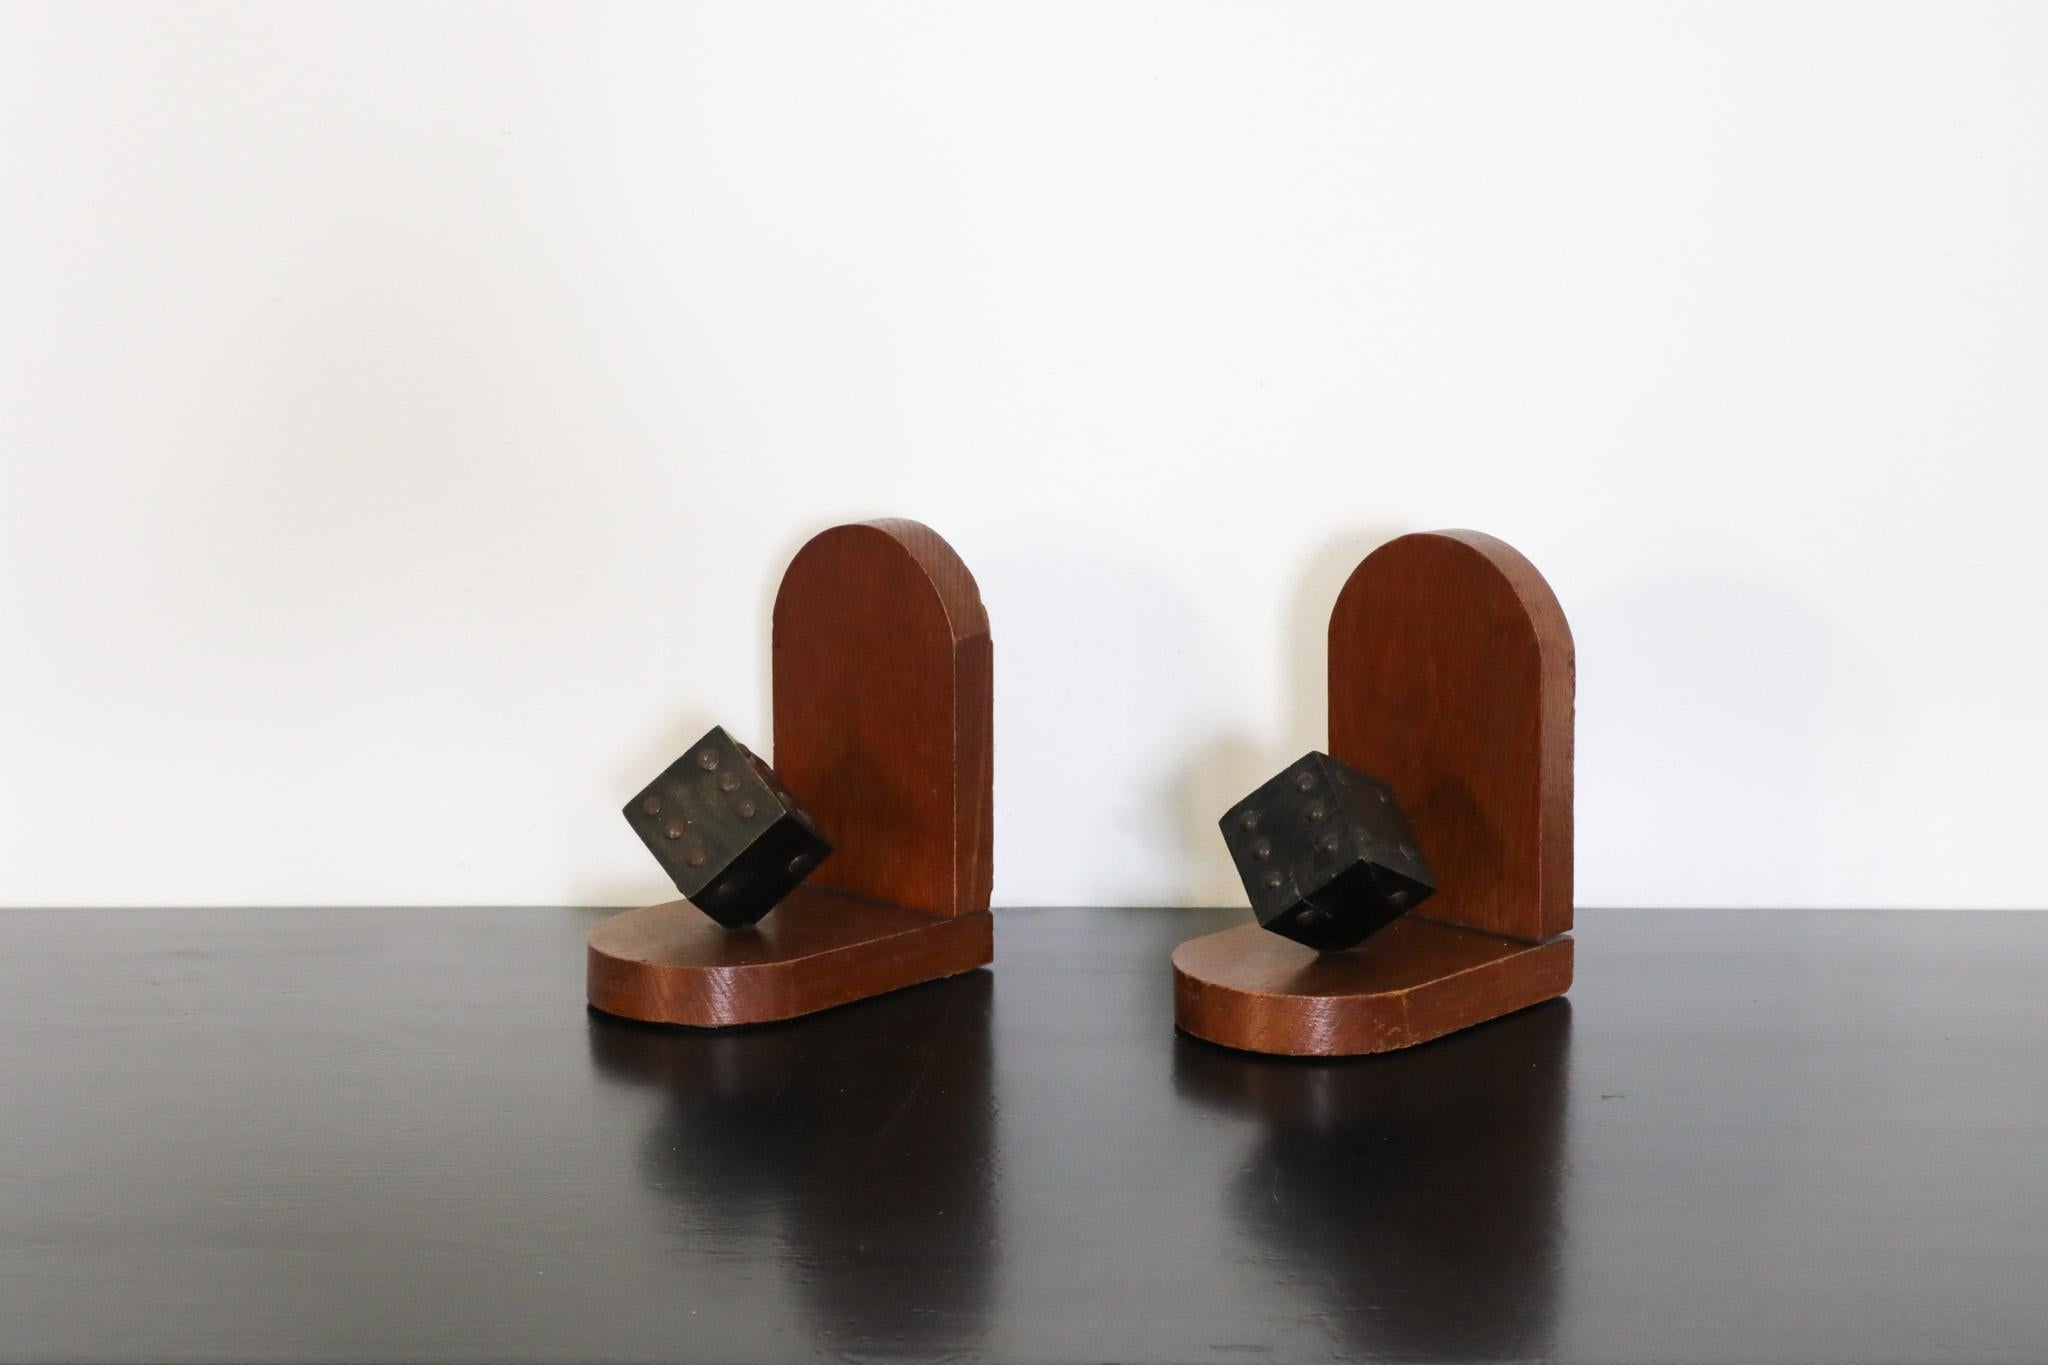 Pair of Wooden Arts & Crafts Dice Bookends In Good Condition For Sale In Los Angeles, CA